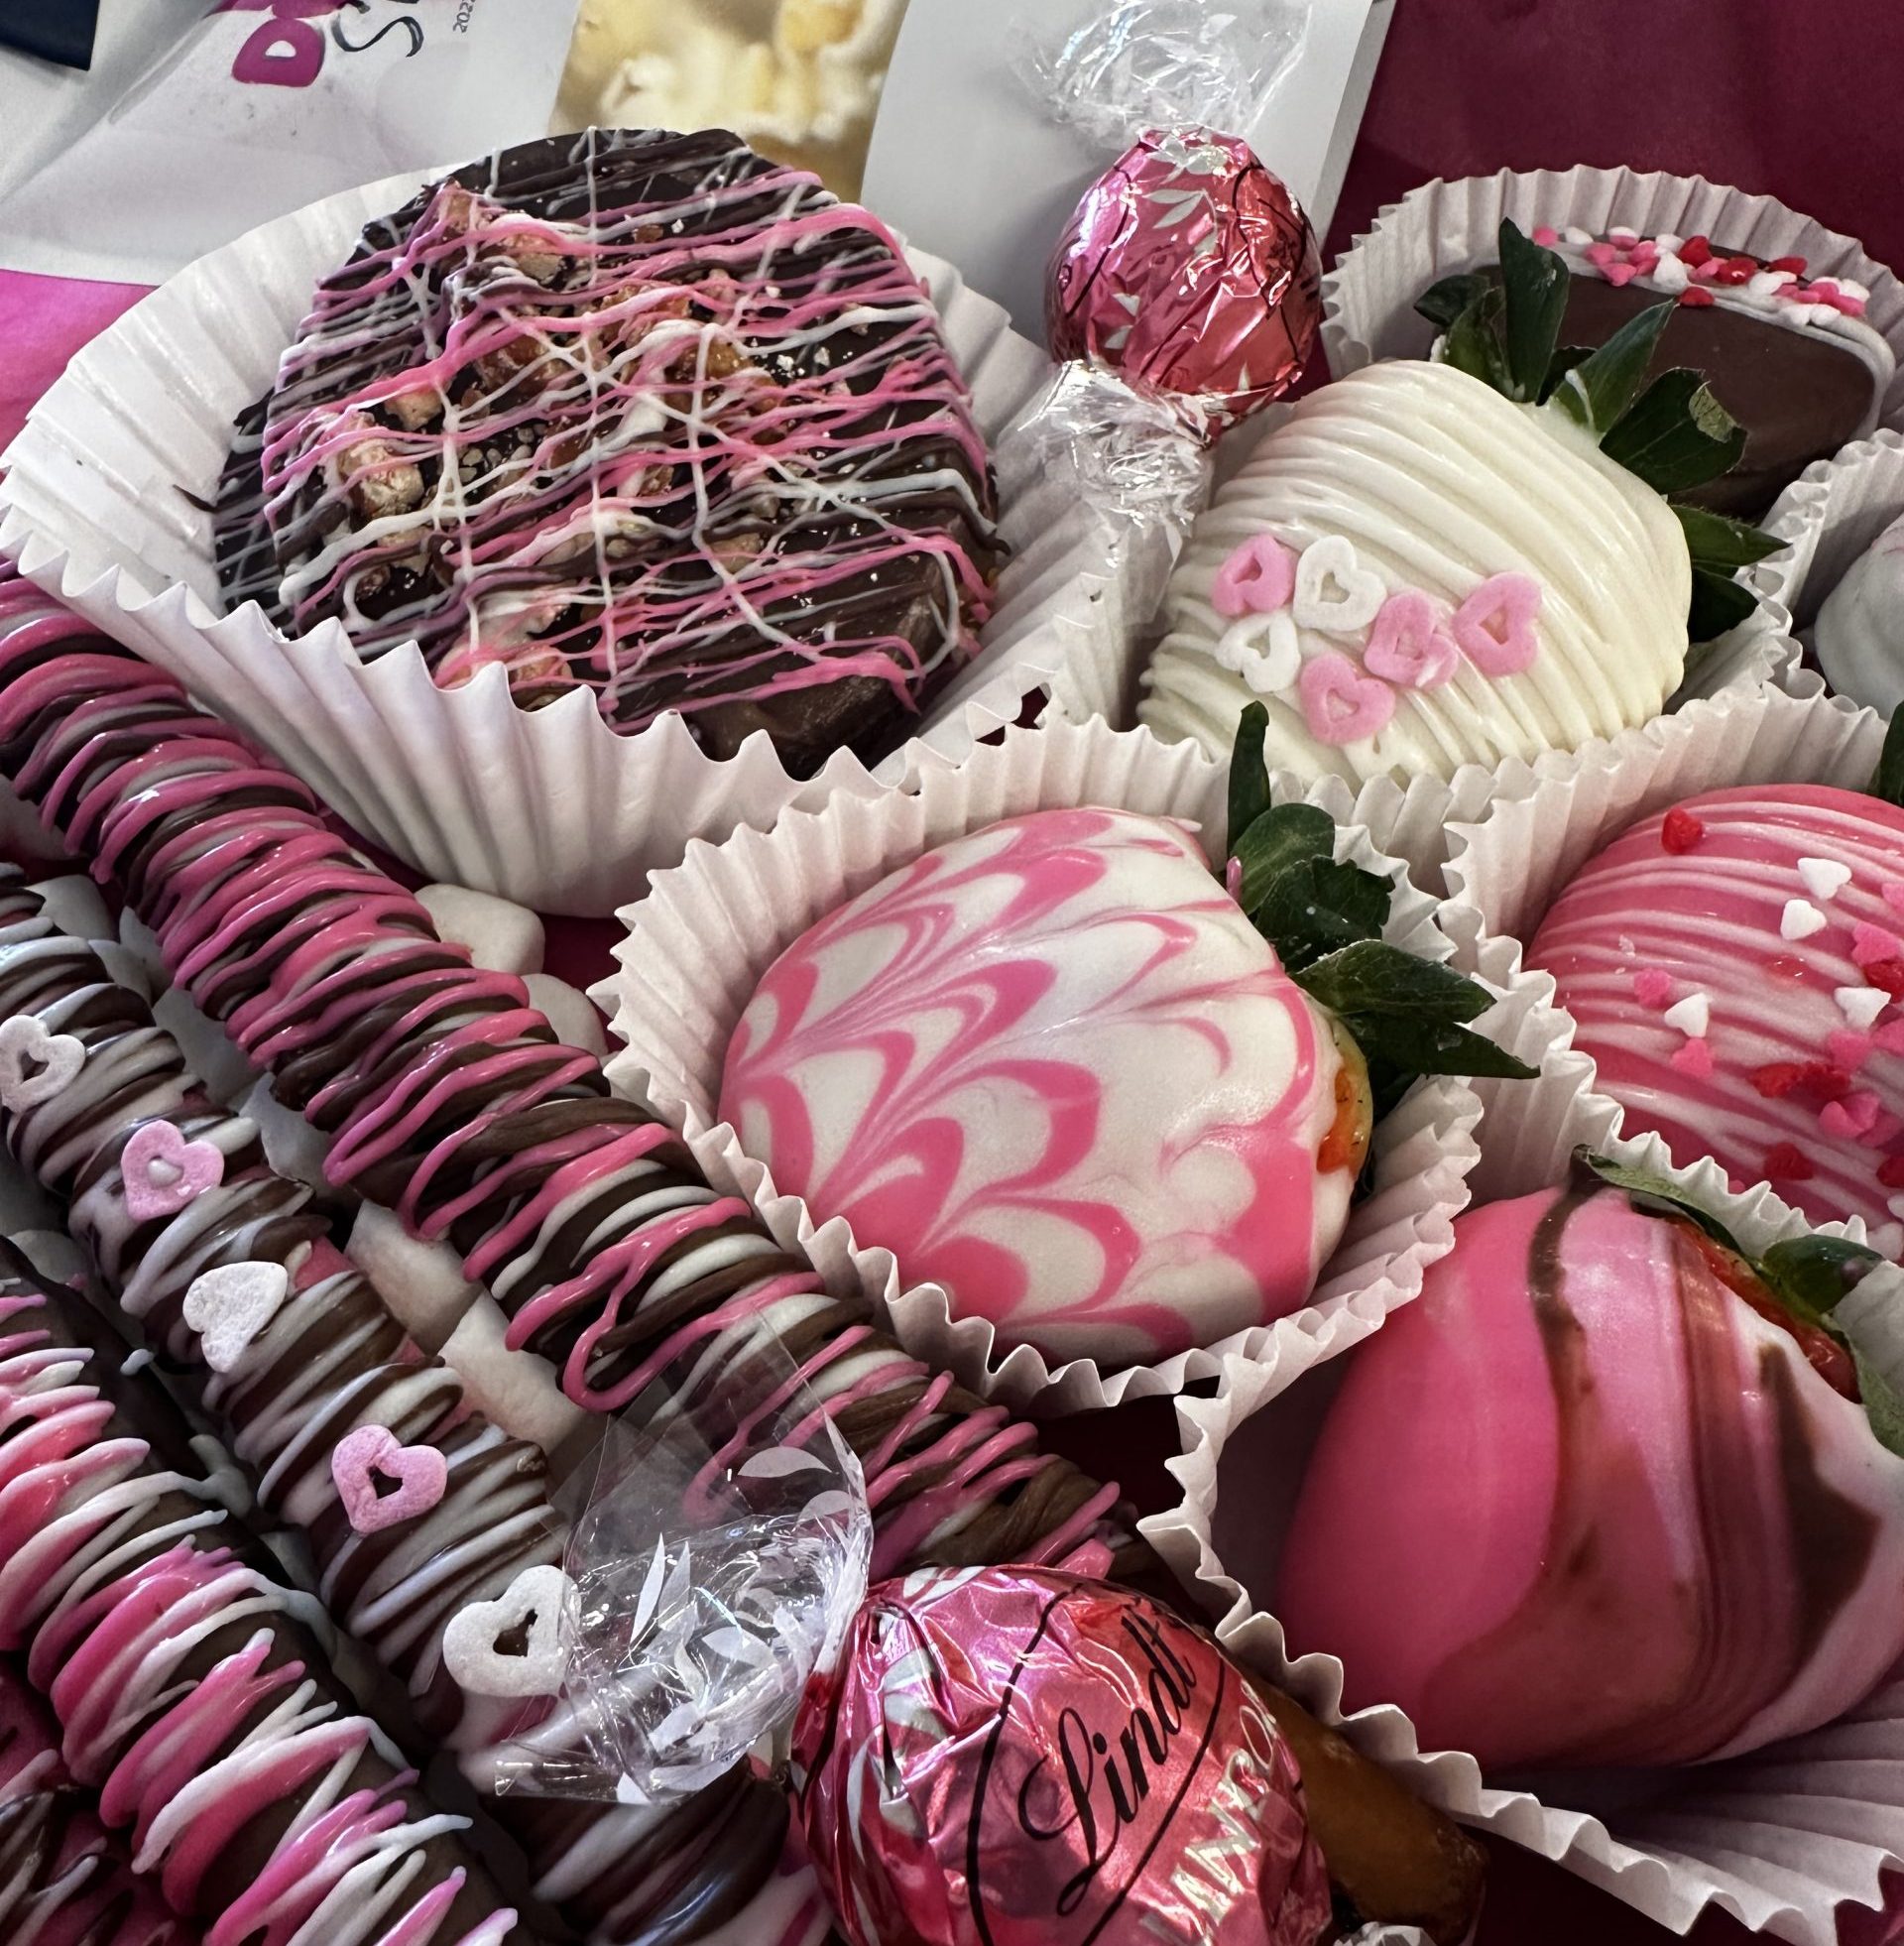 Chocolate-covered strawberries, cookies, pretzels and candies nestled inside cupcake liners and displayed in-store. Items are either bagged or covered in multi-colored chocolate.